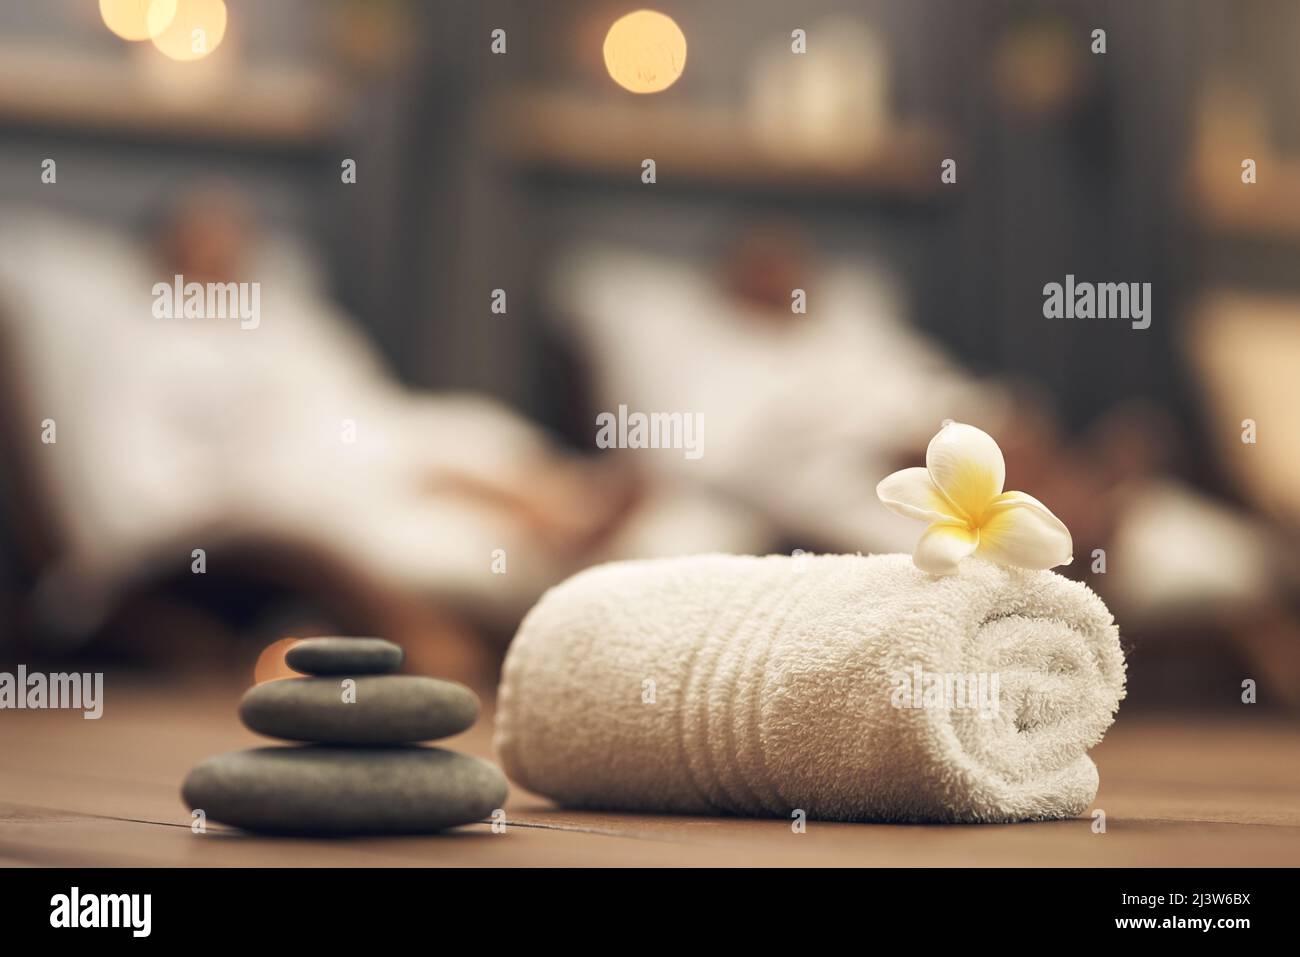 Theres a spa experience out there for everyone. Still life closeup of a tranquil spa arrangement. Stock Photo